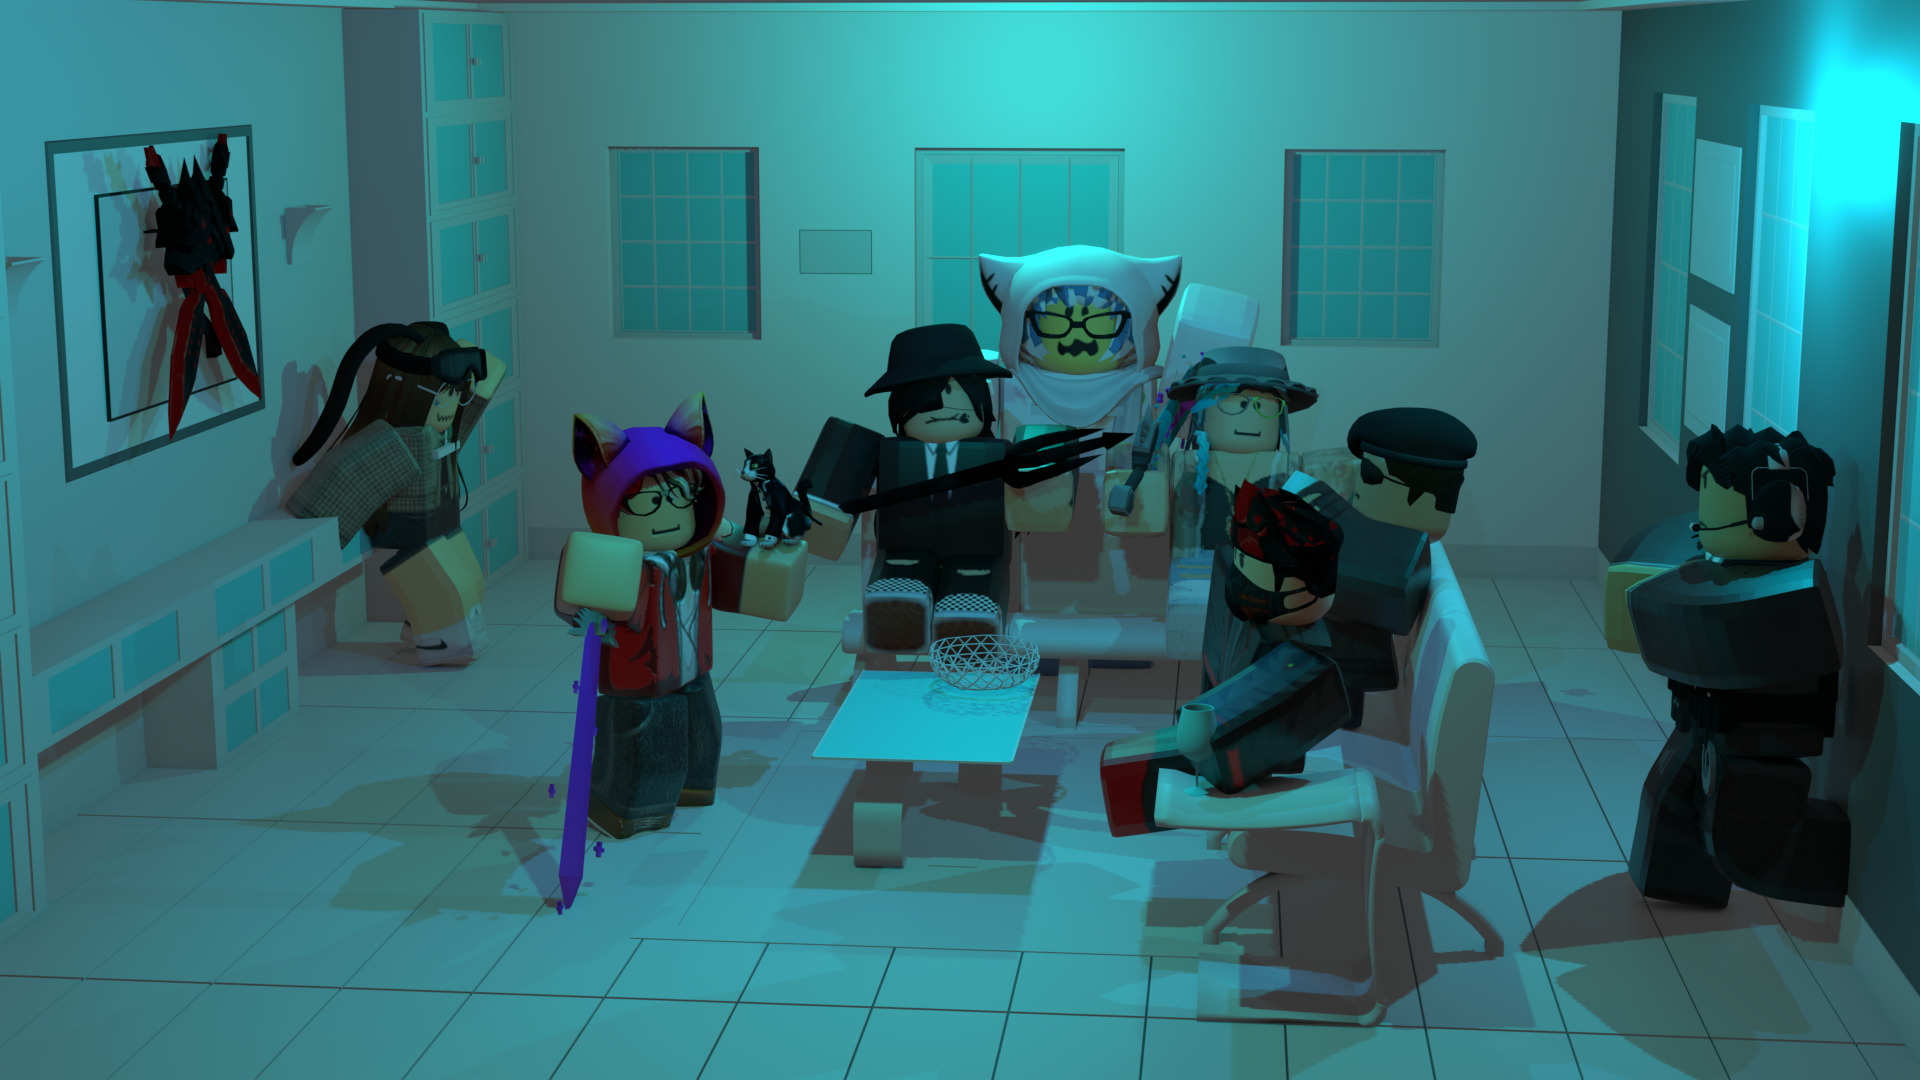 Me and my friends from Zombie stories roblox game. Took around 5 hours but was worth it. Made in blender